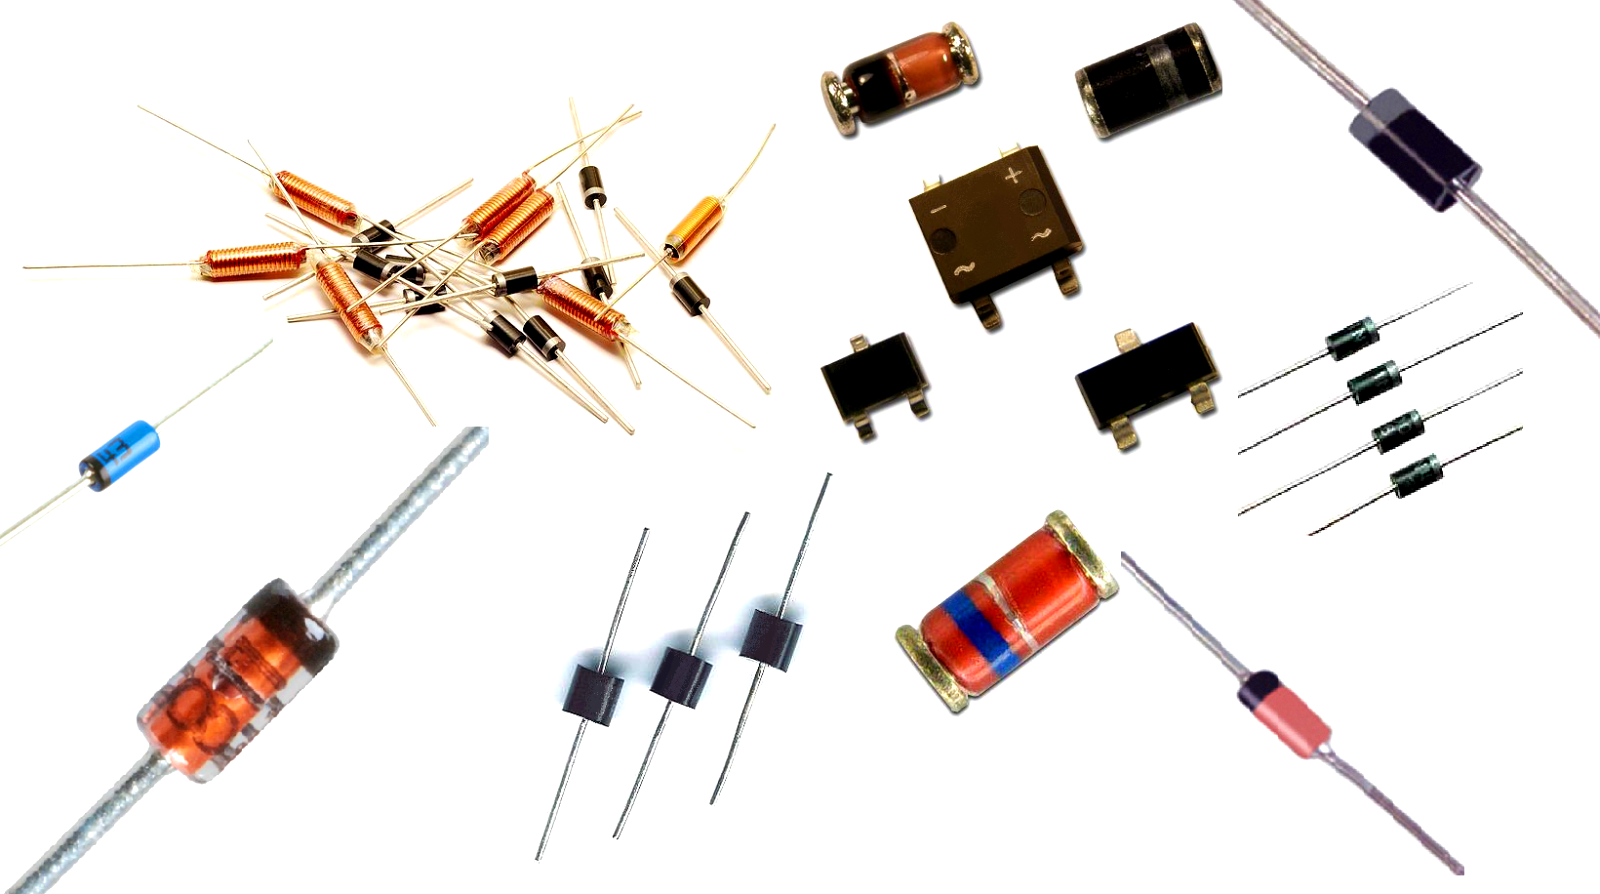 B component. Электронные компоненты. Компоненты в электронике. Diode Electronic components. Электронные компоненты баннер.